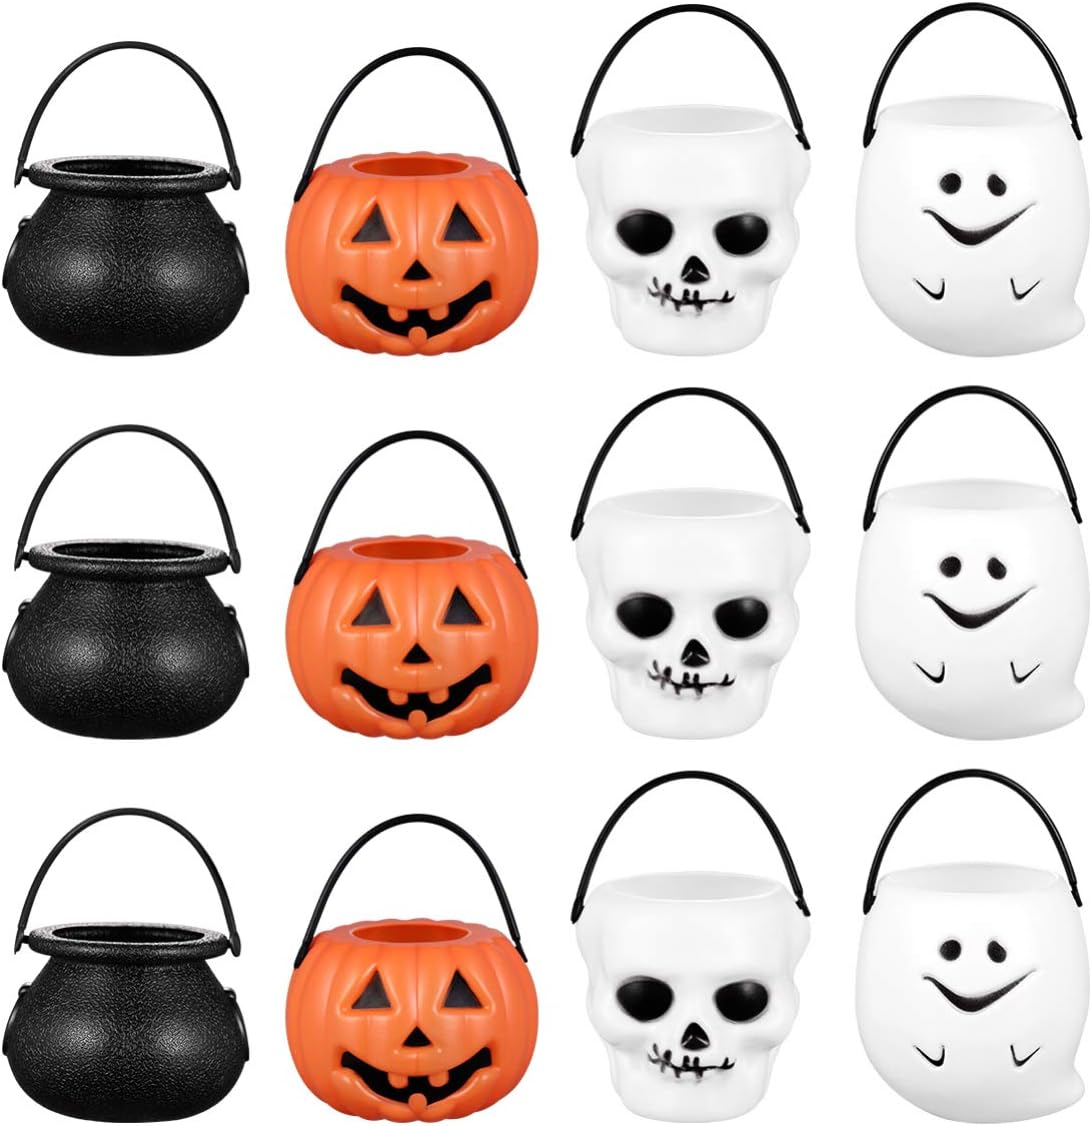 So cute! These will be perfect for a halloween photo shoot with my toy size dogs.